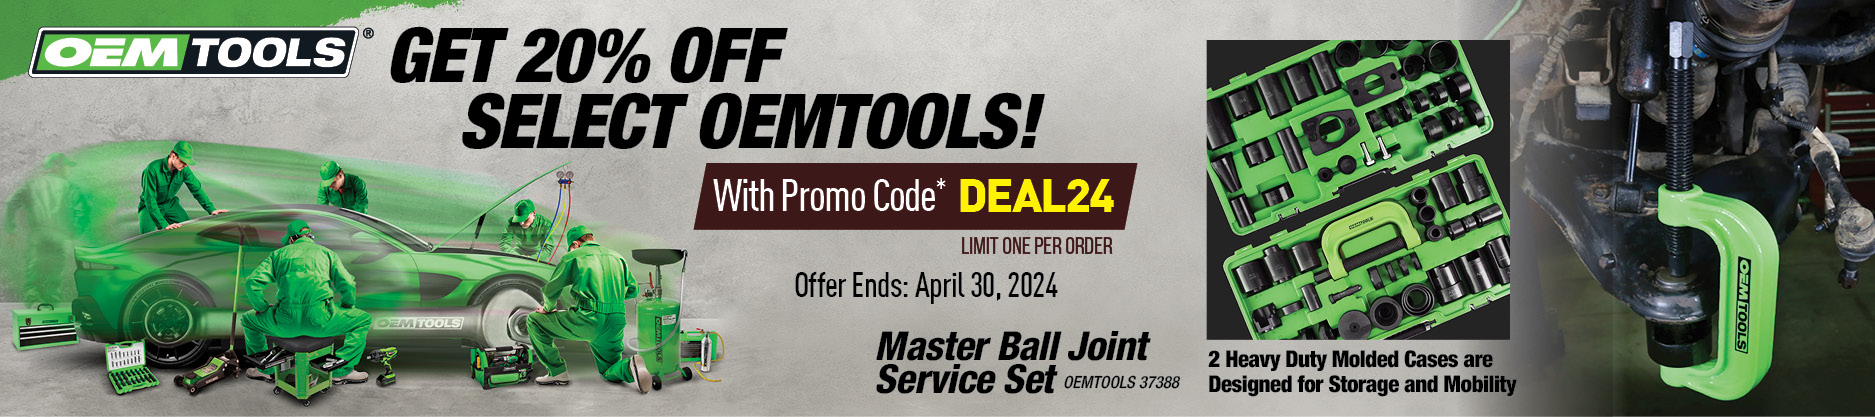 20% OFF select OEMTOOLS with promo code DEAL24